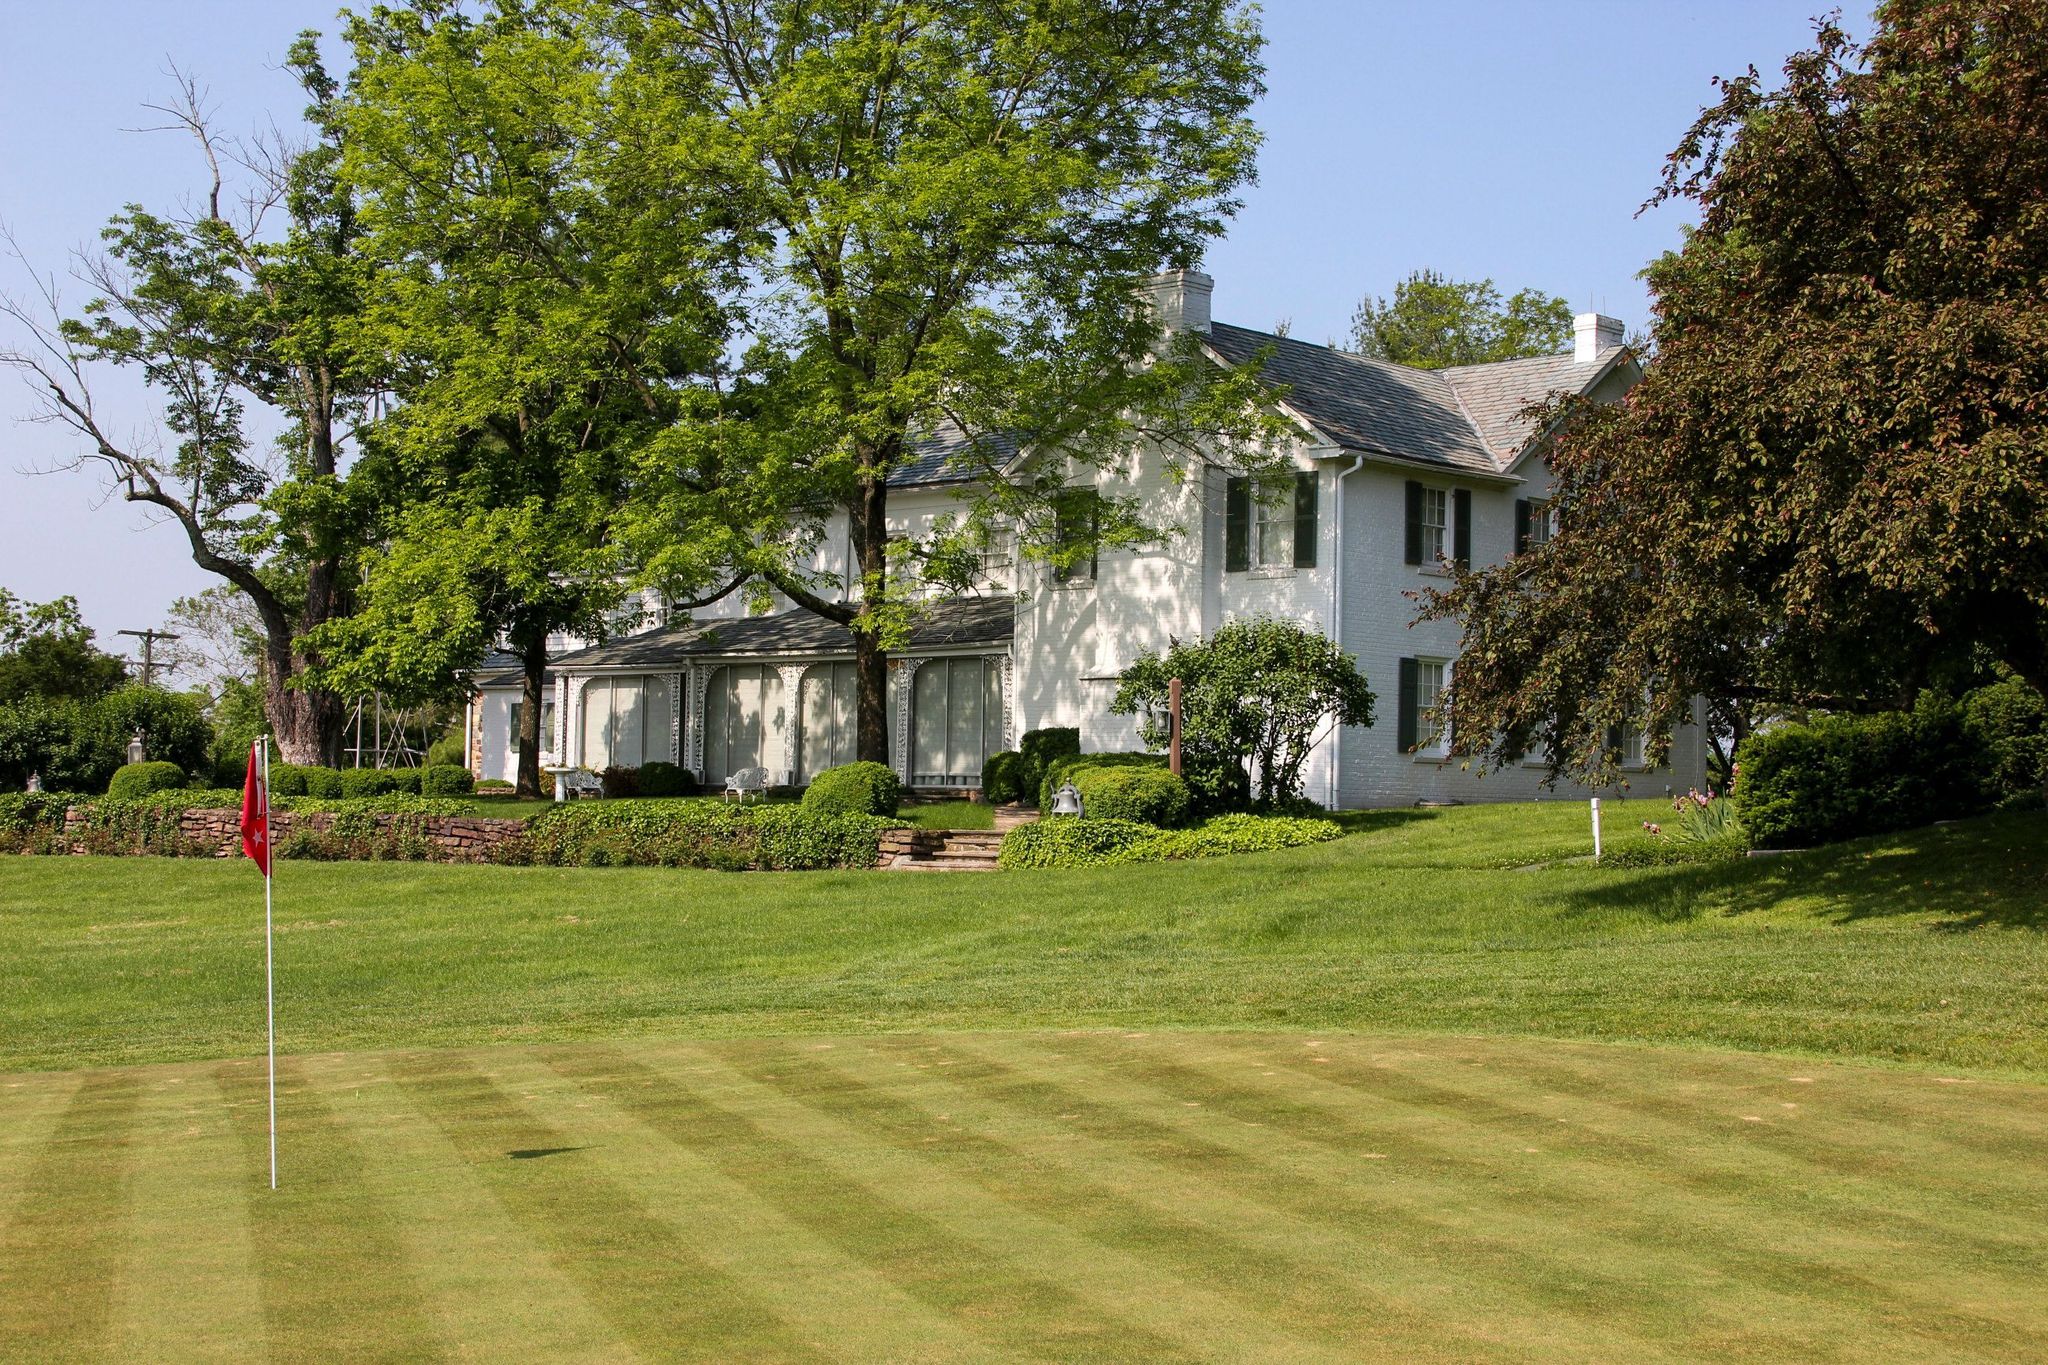 President Eisenhower was an avid golfer and had a putting green added to the backyard.